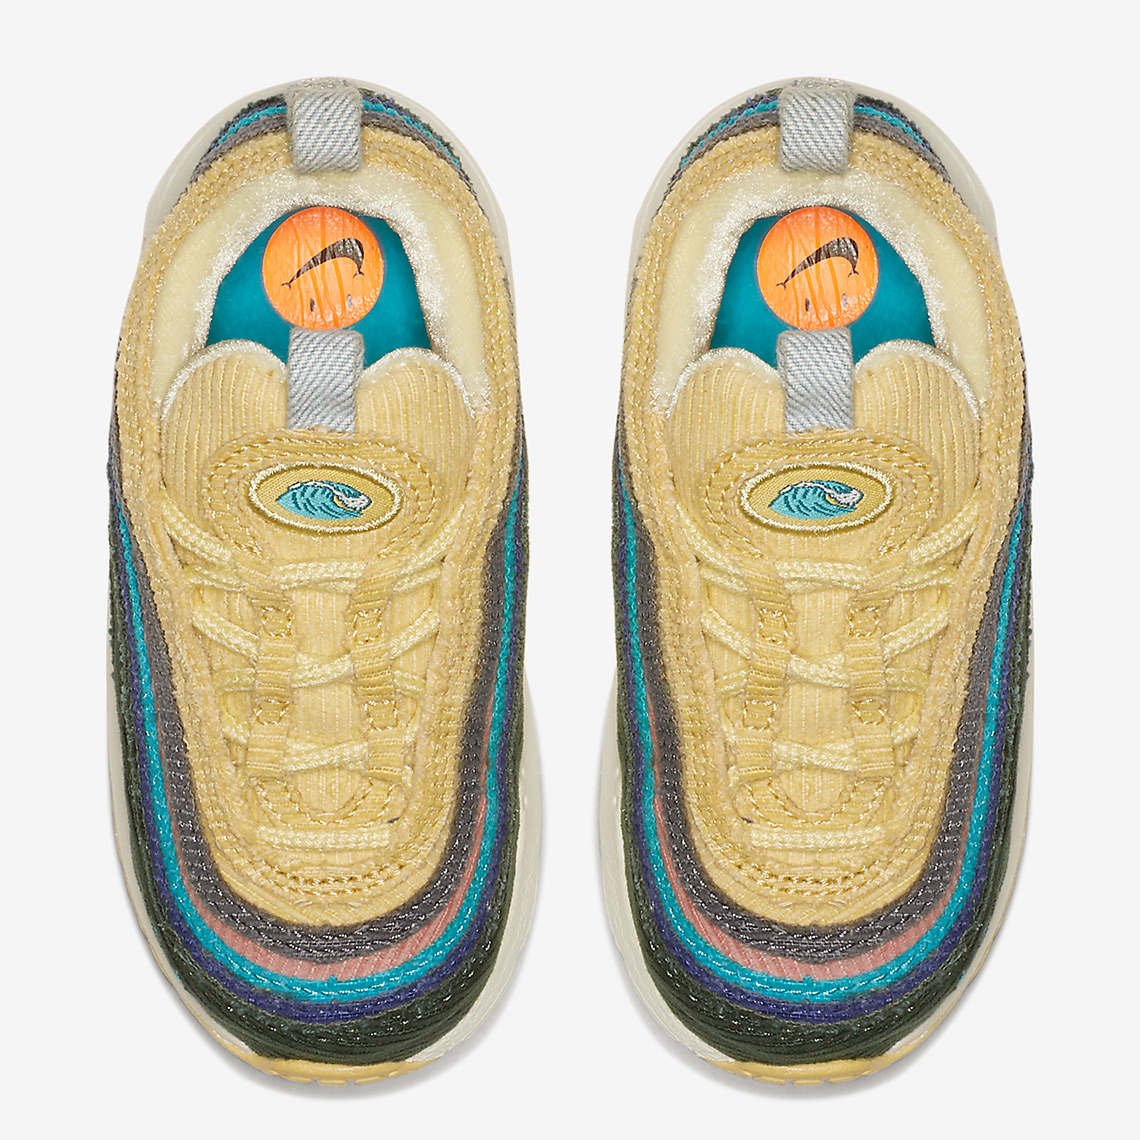 Sean Wotherspoon Nike Air Max 971 Toddler Official Images 3